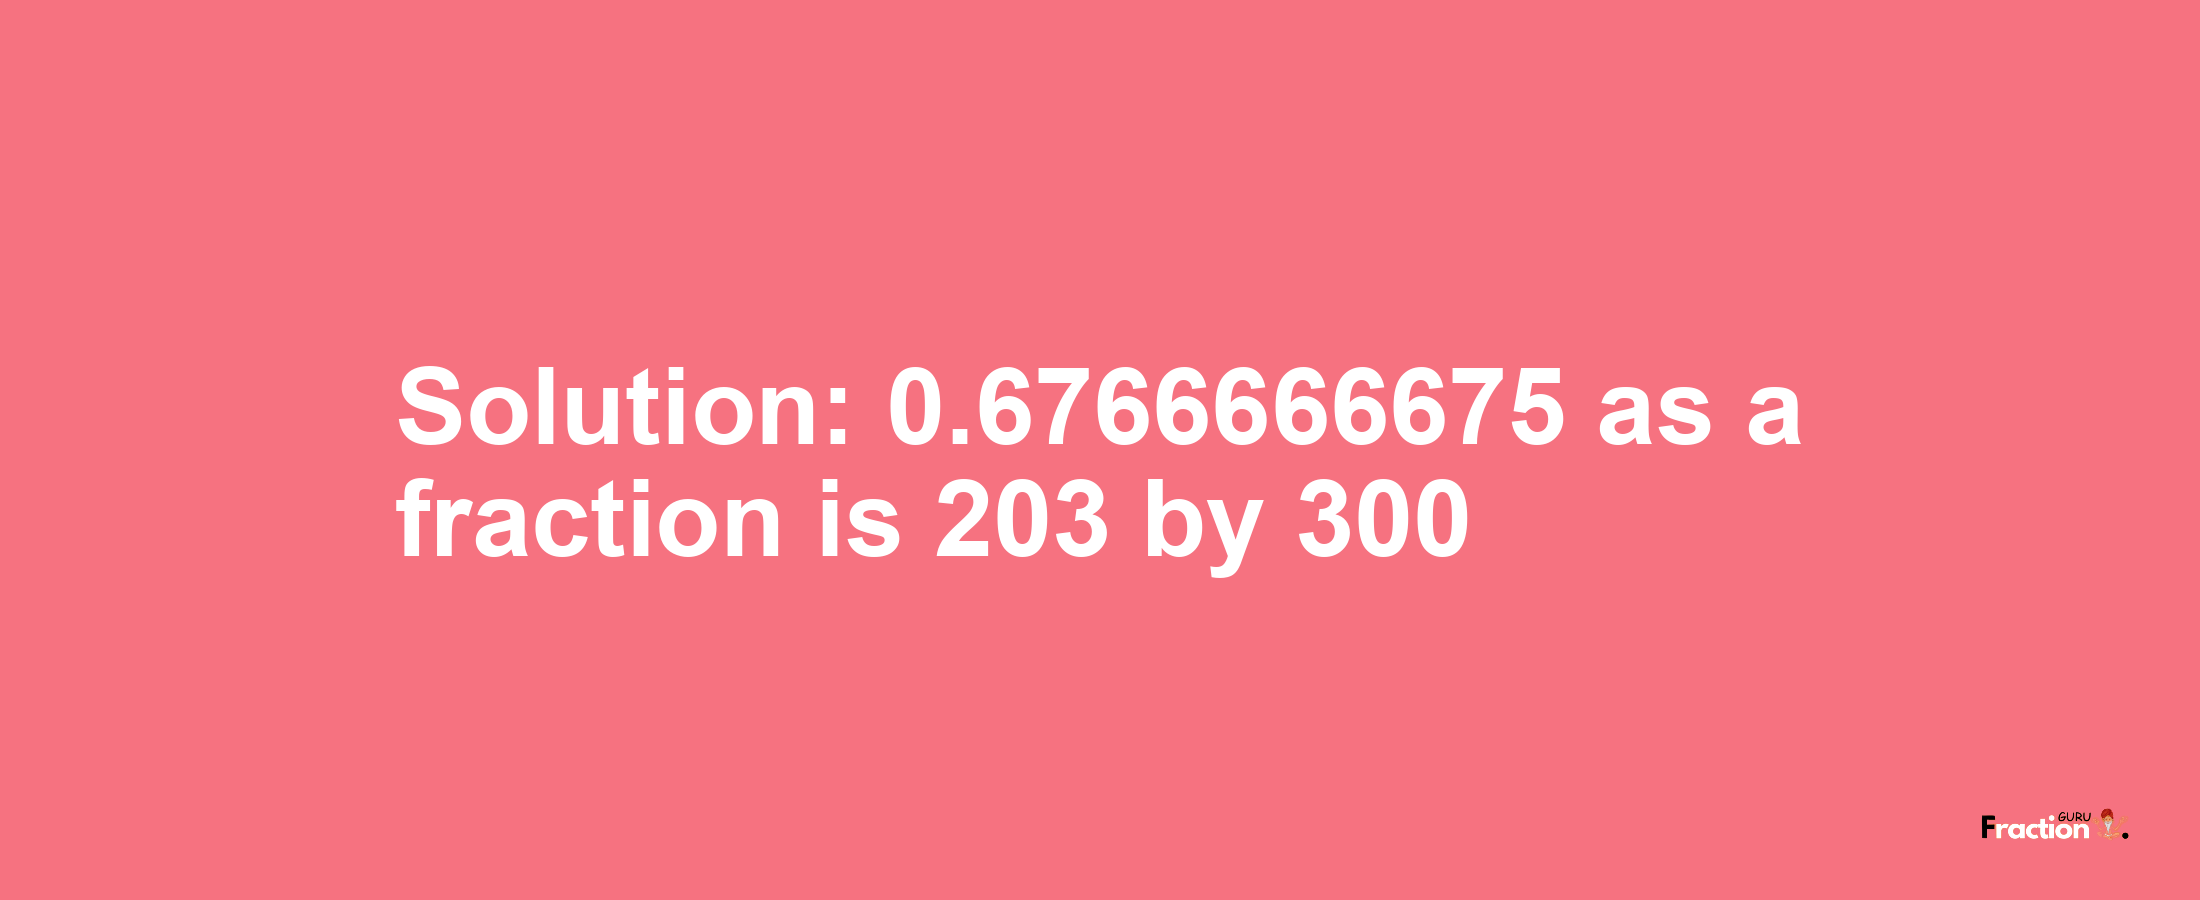 Solution:0.6766666675 as a fraction is 203/300